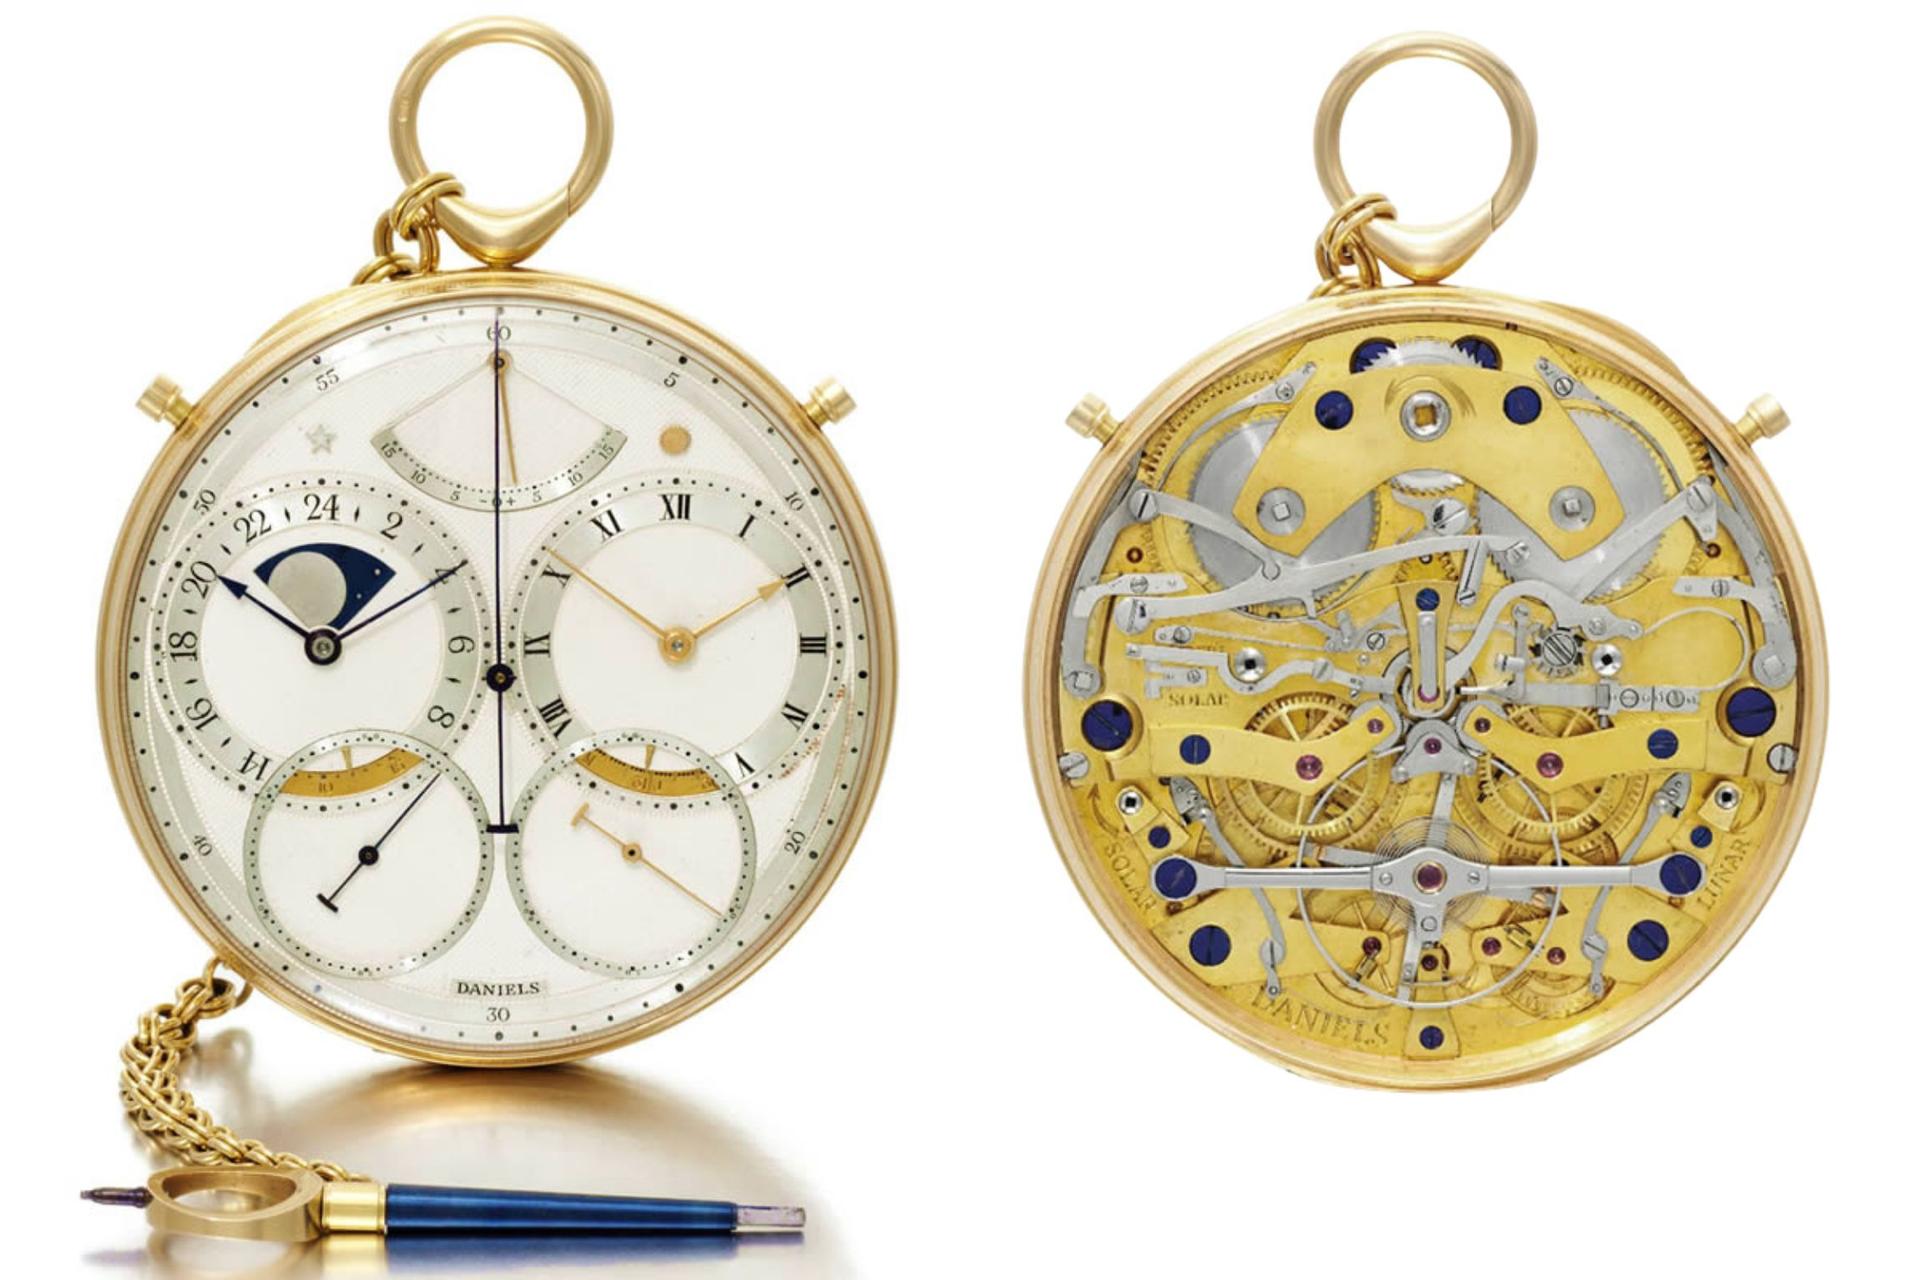 In 2019, Sotheby’s sold George Daniels' Space Traveller I £3.2 million, a record for an English watch at auction